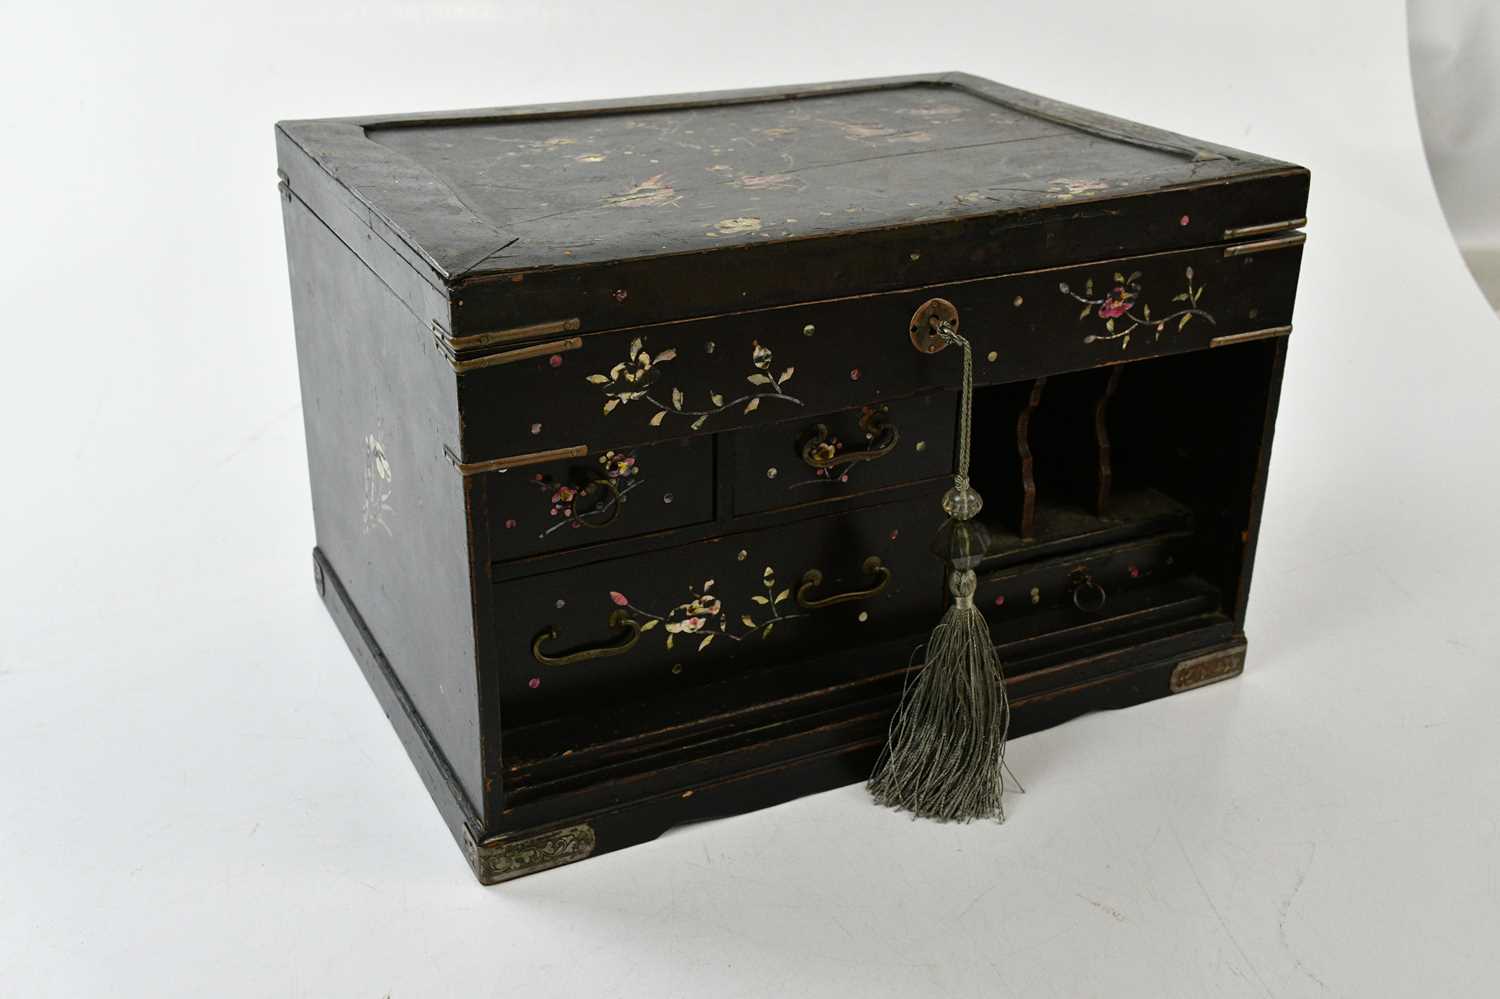 An early 20th century Japanese lacquered jewellery cabinet with mother of pearl inlaid decoration - Image 5 of 6